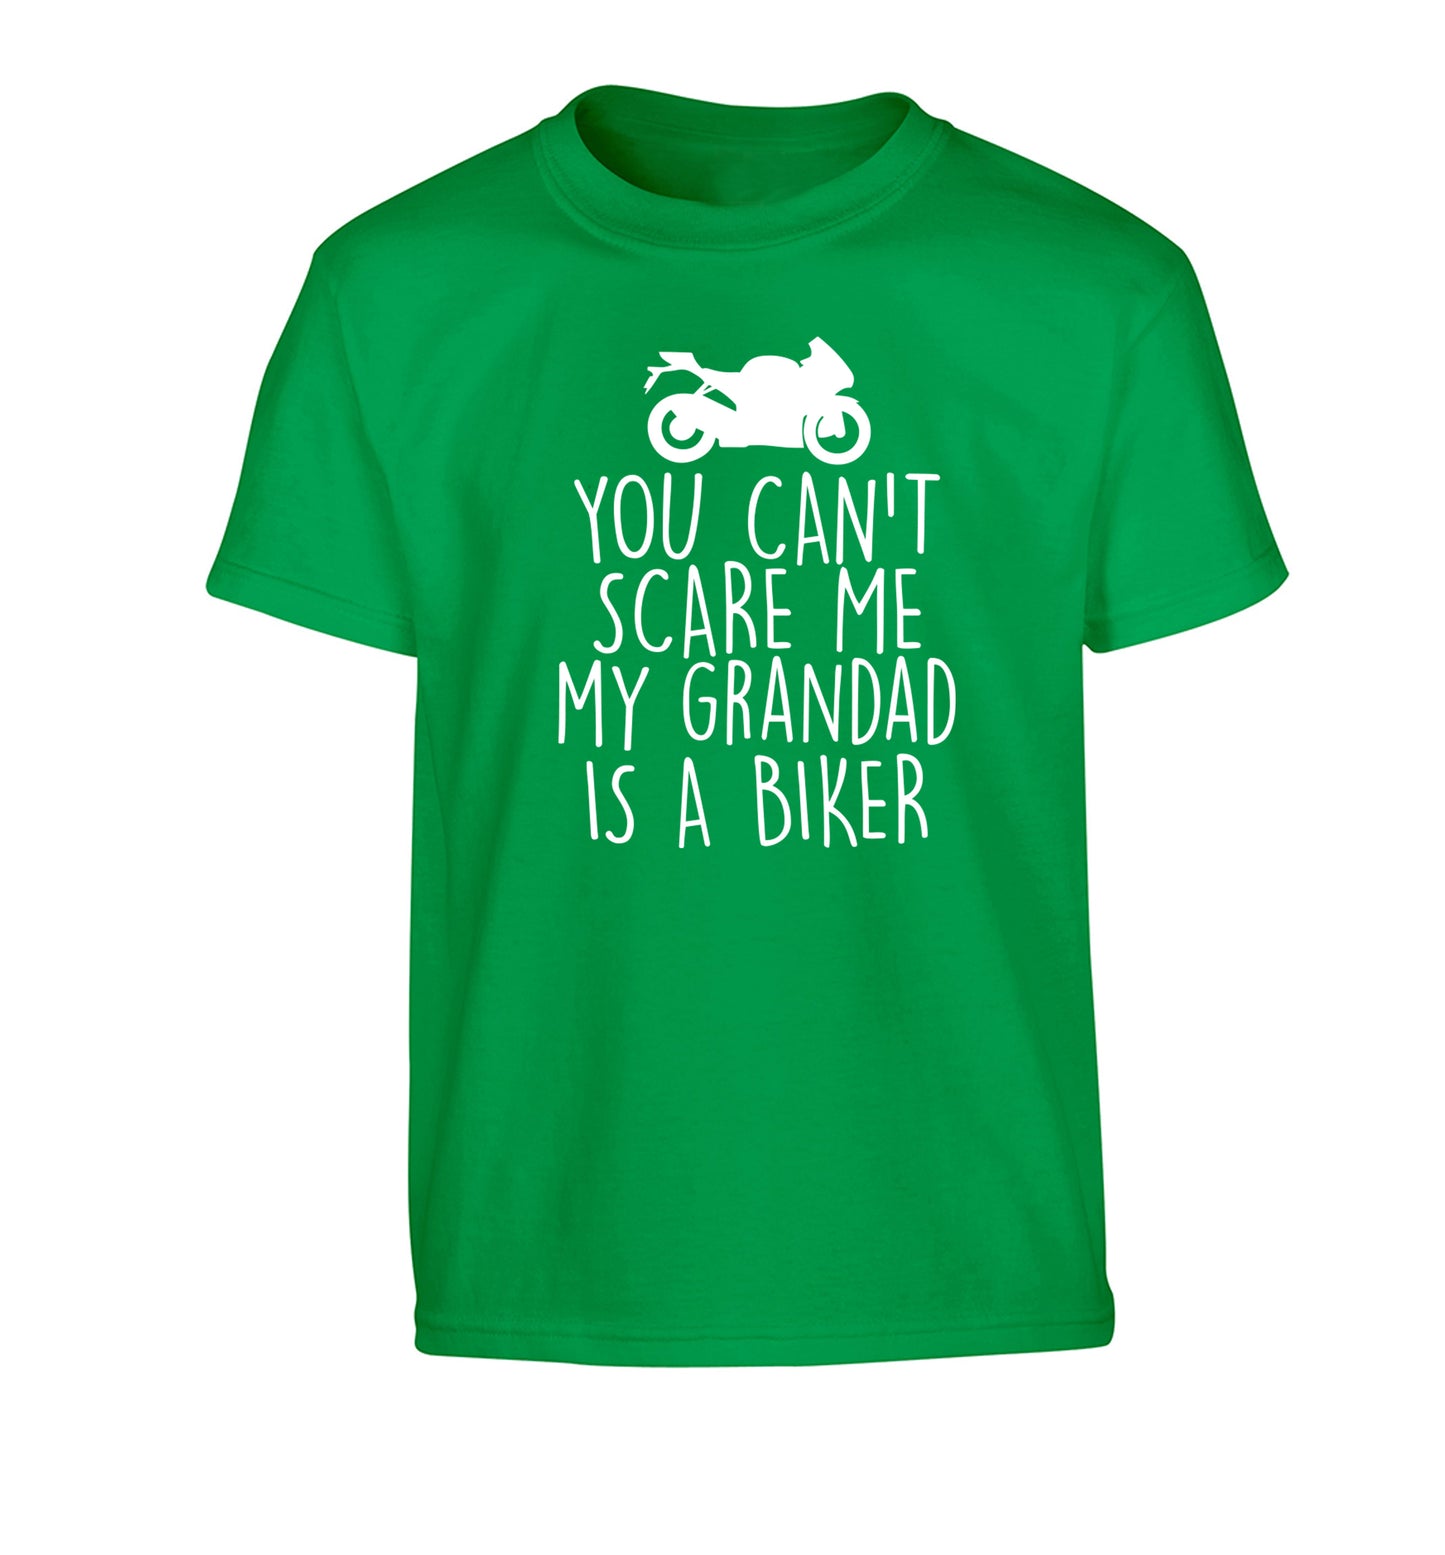 You can't scare me my grandad is a biker Children's green Tshirt 12-13 Years